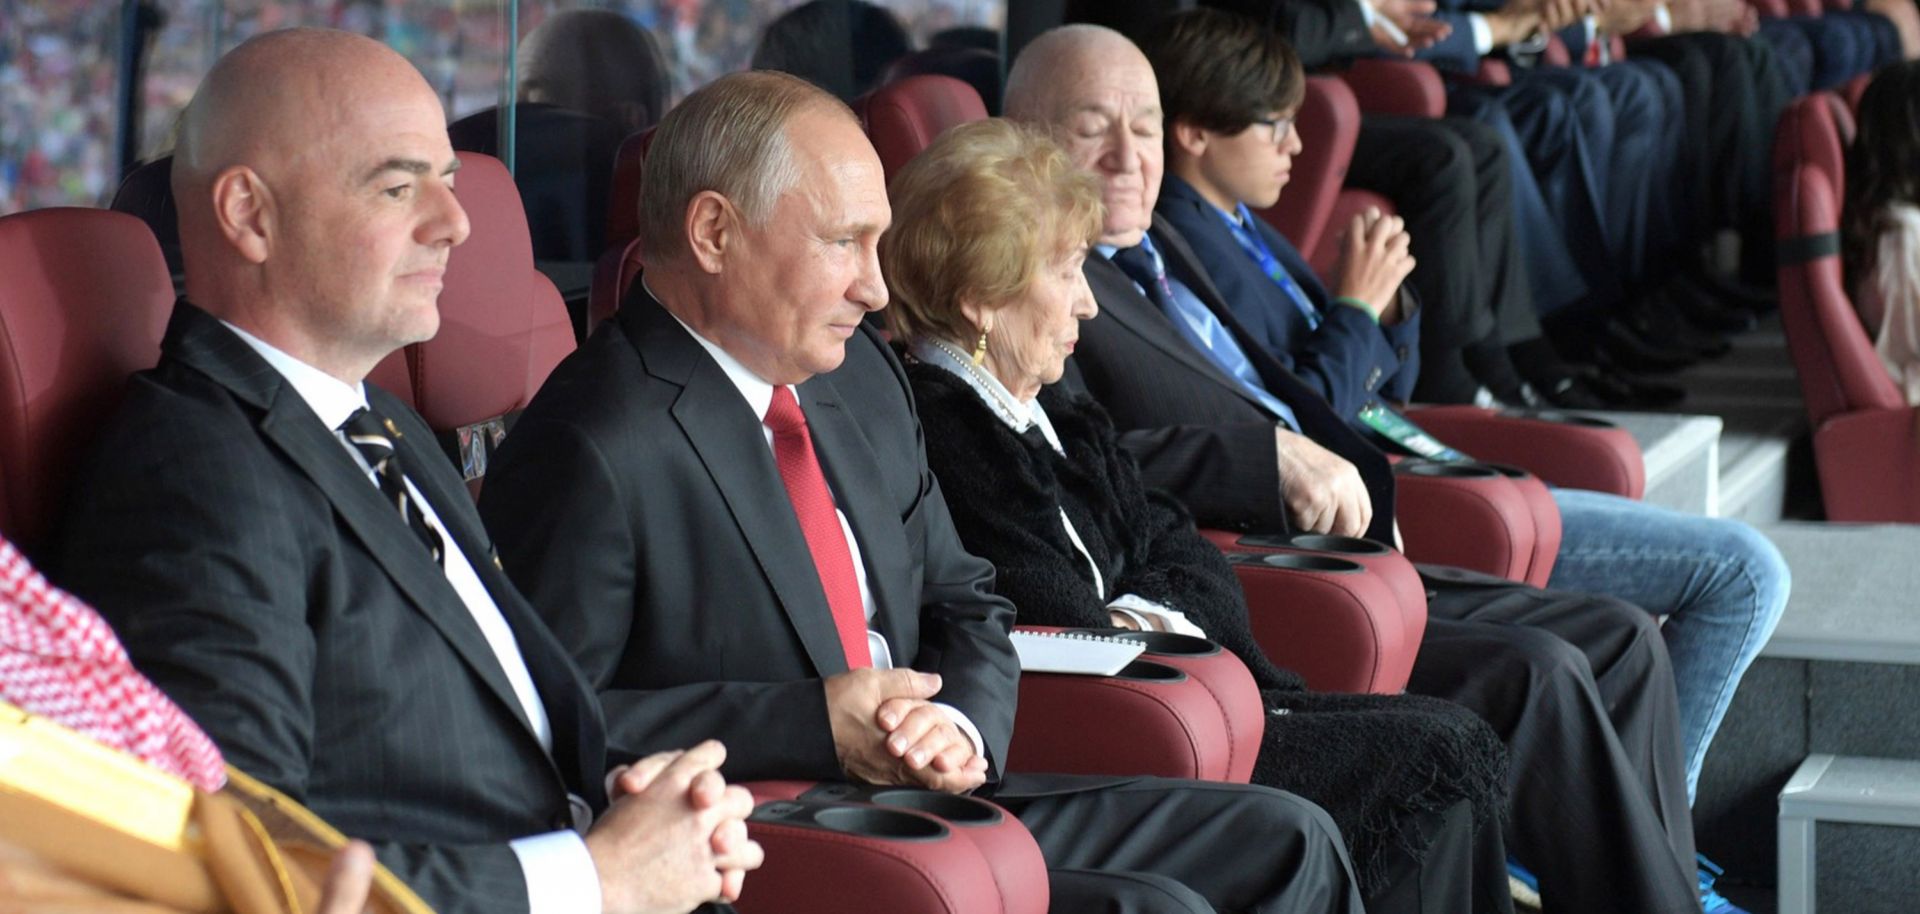 Russian President Vladimir Putin (C) watches the opening game of the 2018 World Cup next to FIFA President Gianni Infantino (L), who has praised him for the turnout at the tournament.